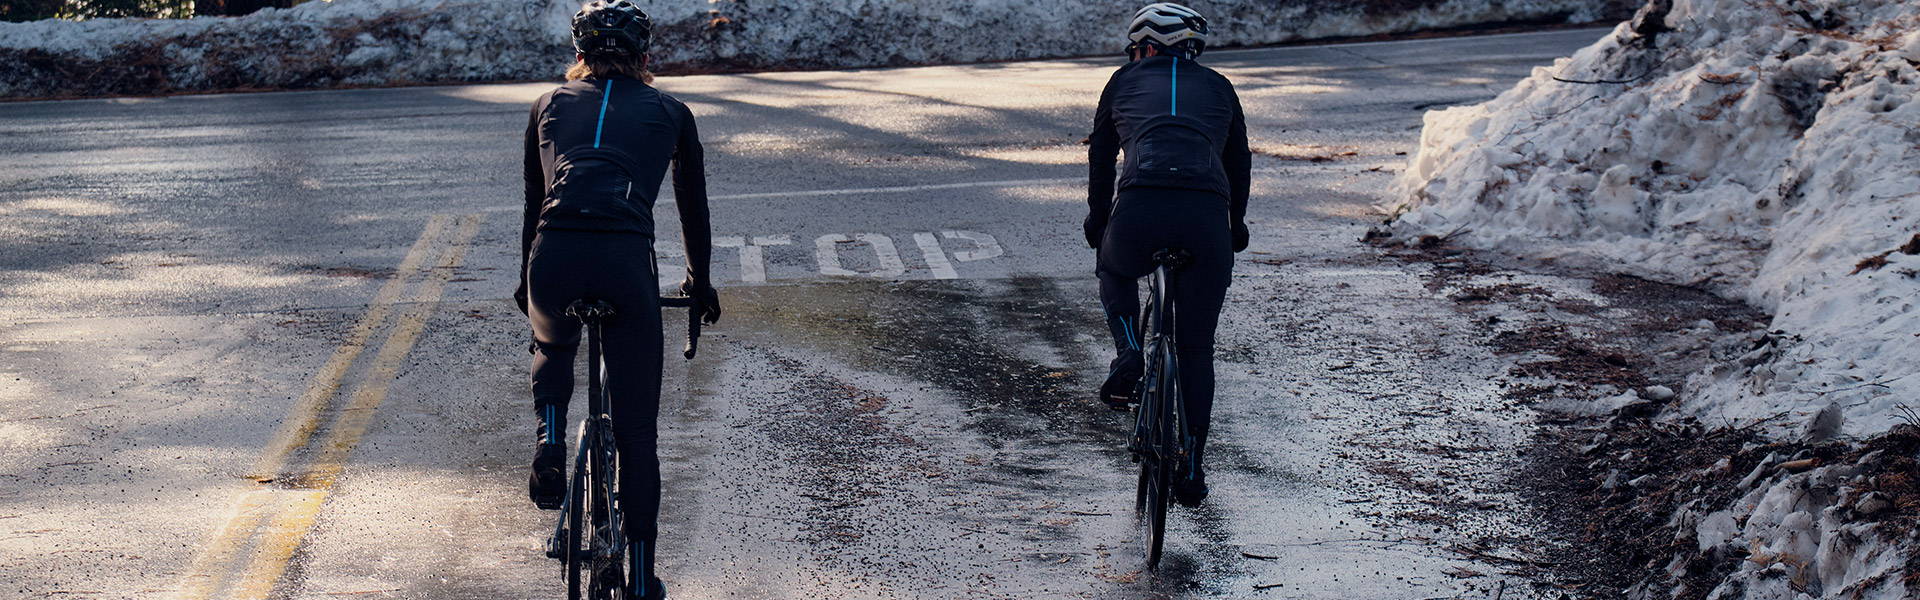 winter-cycling-banner_1580141568